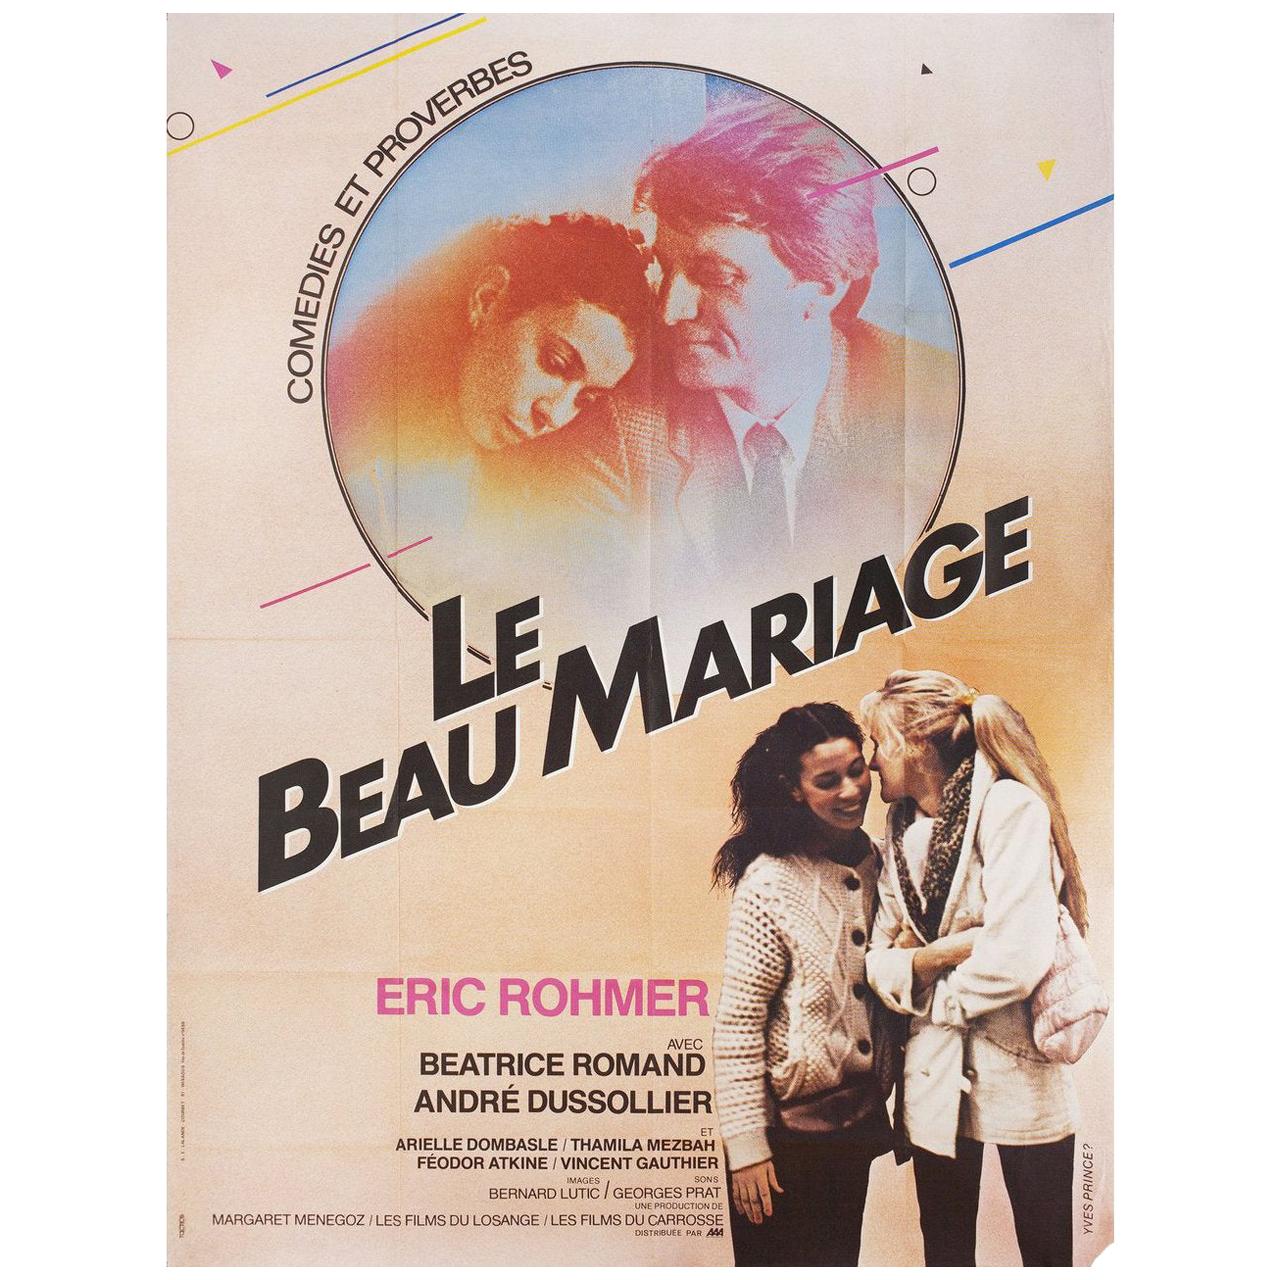 "Le Beau Mariage" 1982 French Grande Film Poster